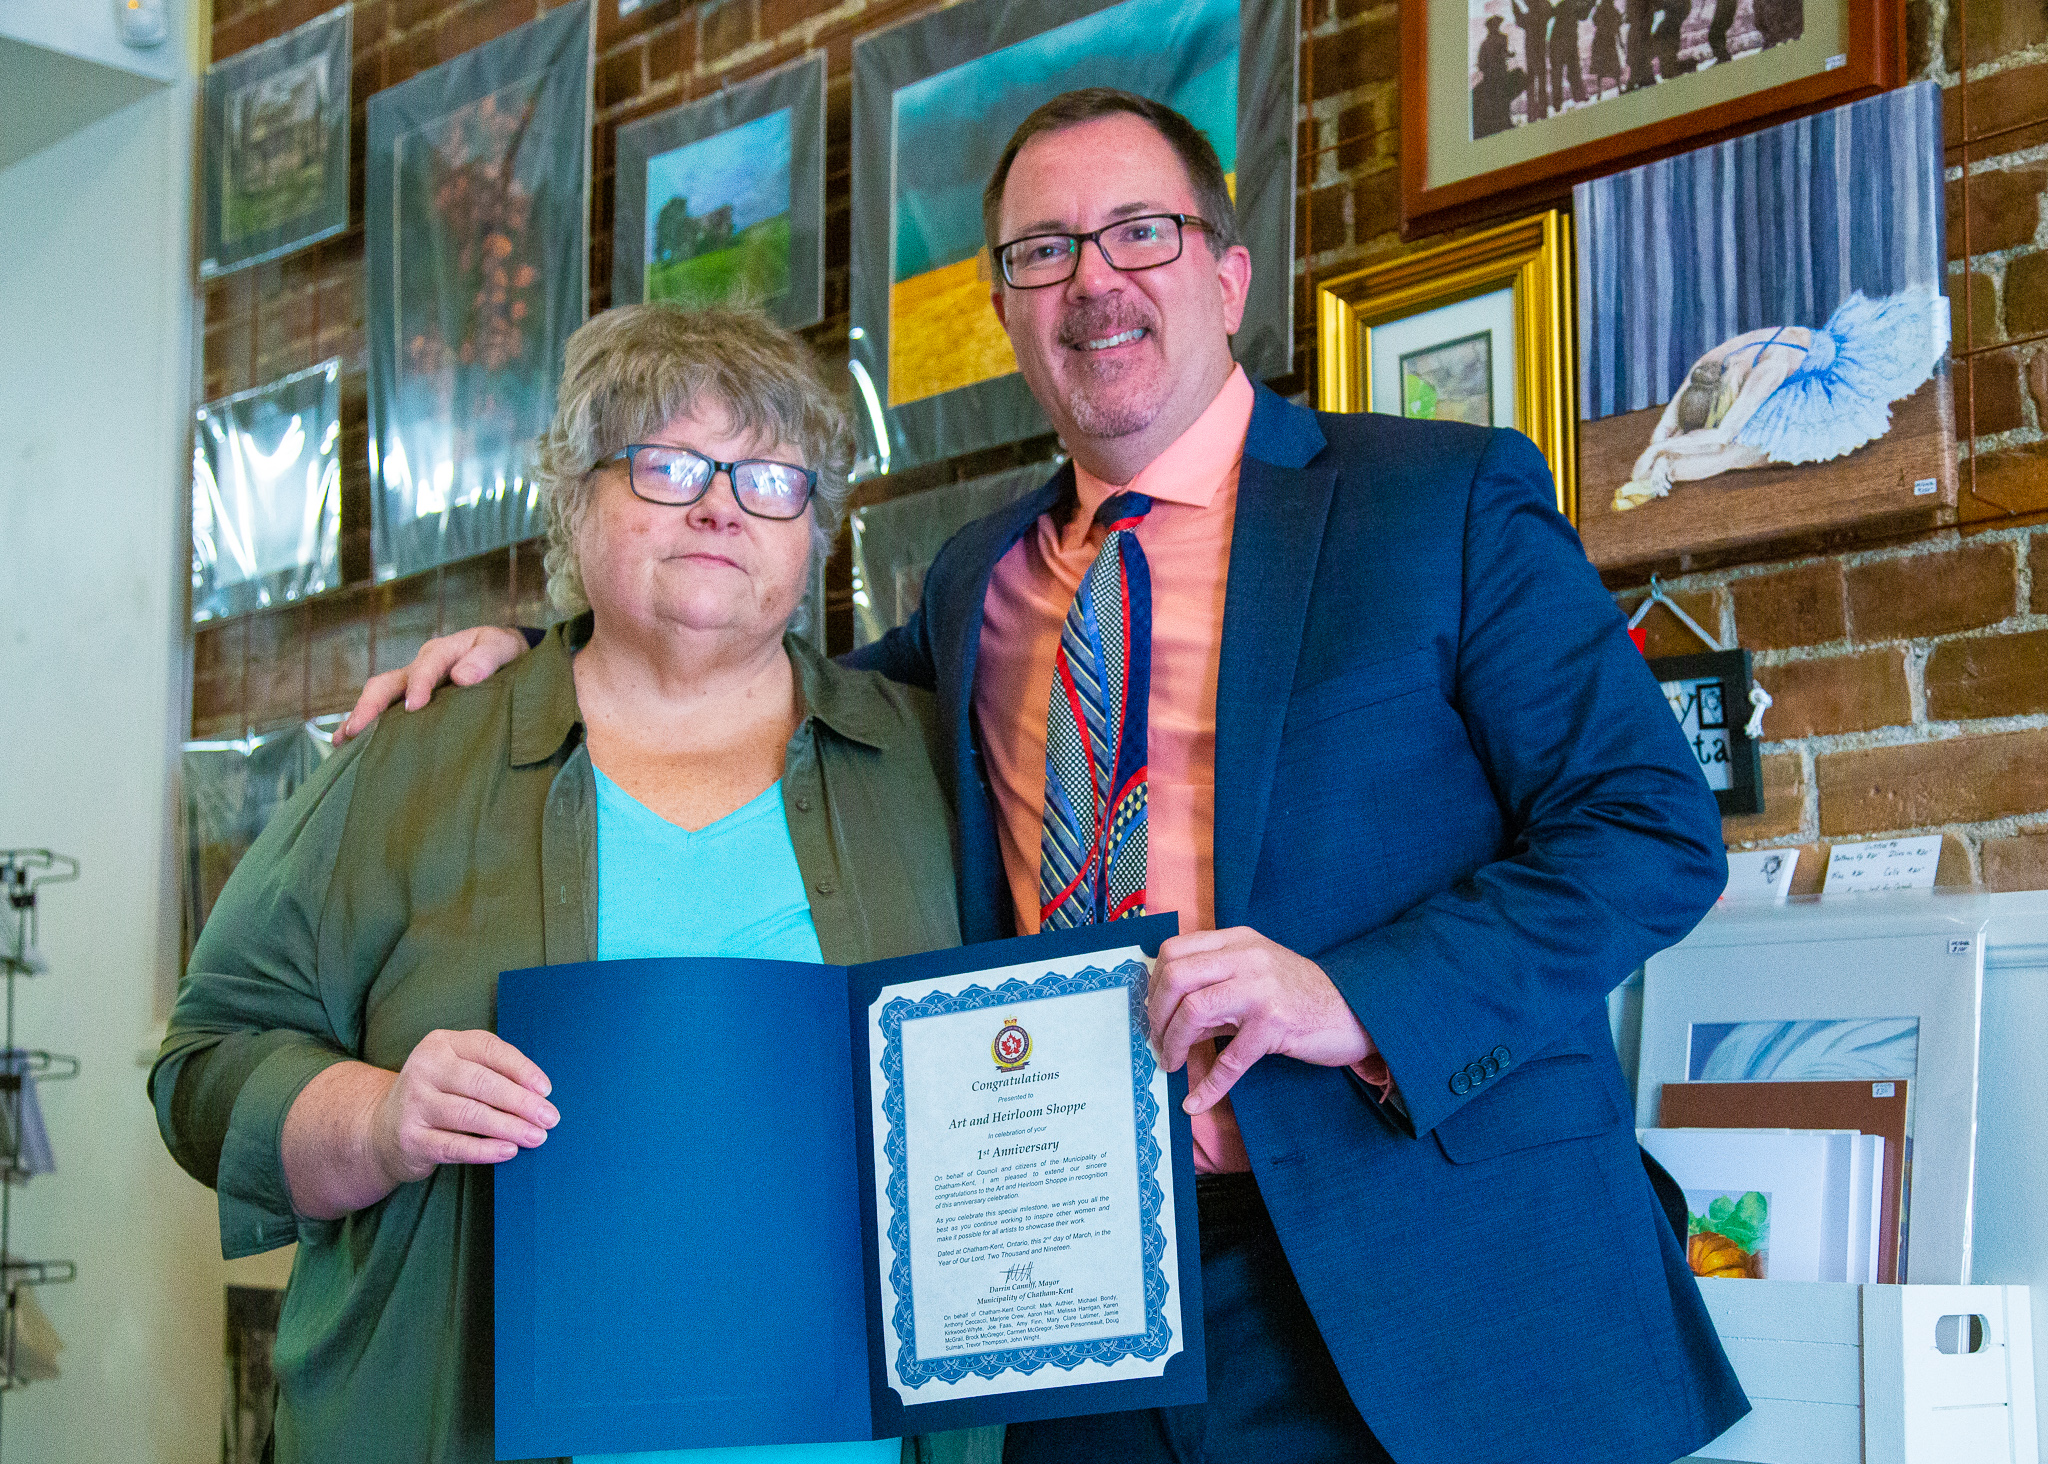 Chris Ford, co-owner of the Art and Heirloom Shoppe, receiving a certificate of congratulations from Chatham-Kent Mayor,